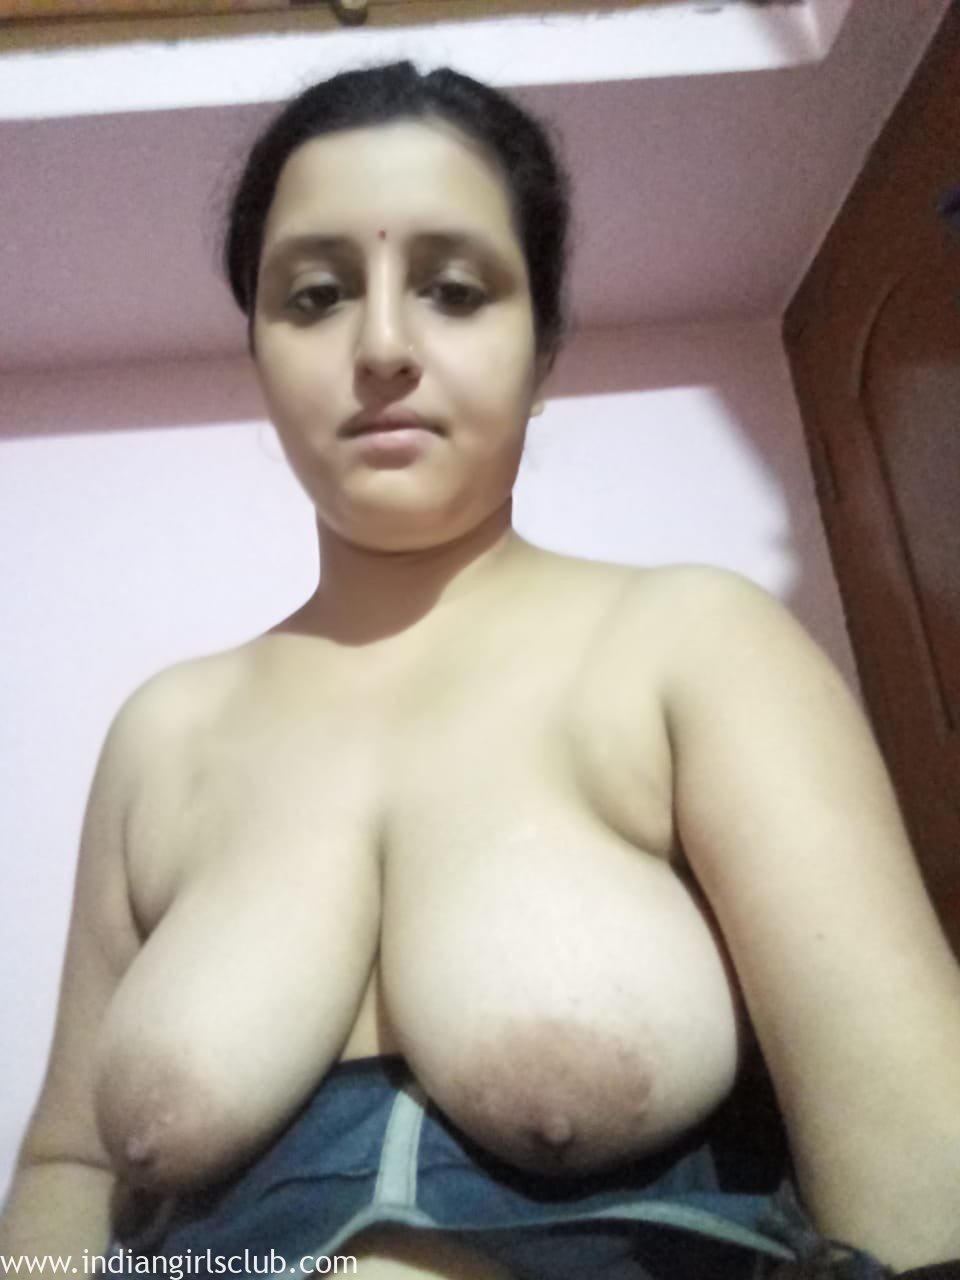 big-tits-bengali-indian-housewife-ready-for-hot-sex-3 - Indian Girls Club image